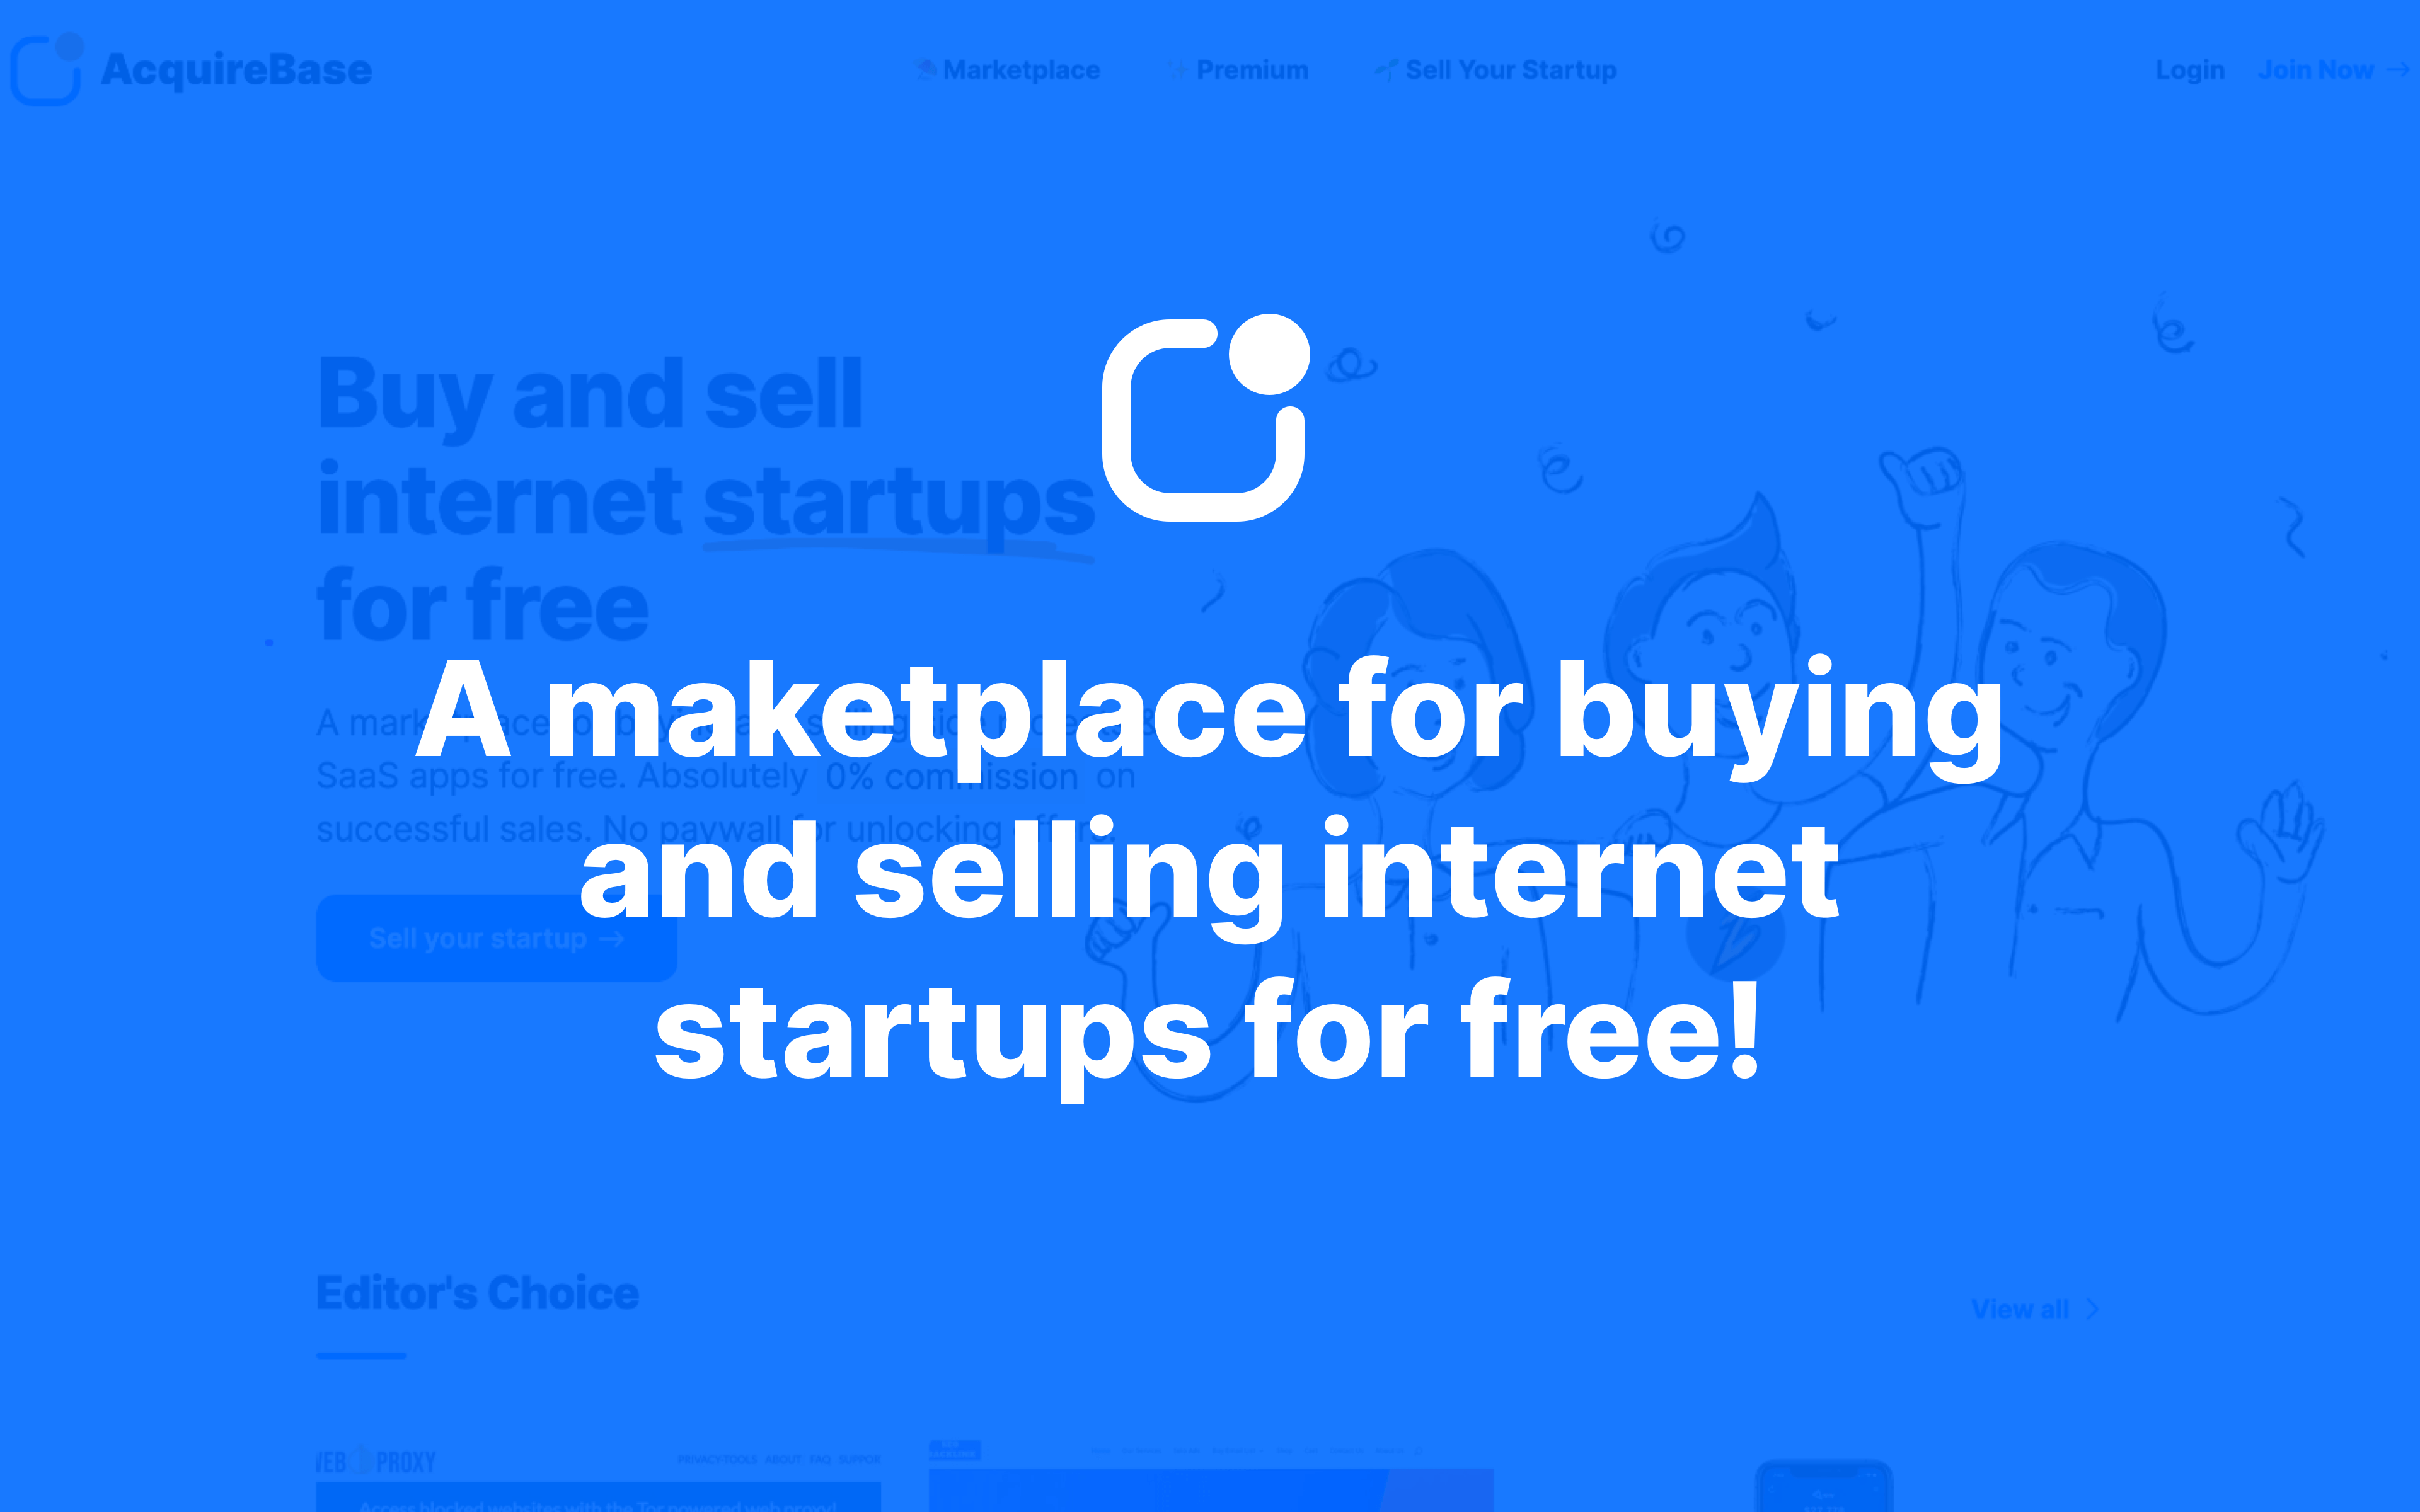 🌱 AcquireBase: Buy and sell internet startups for free